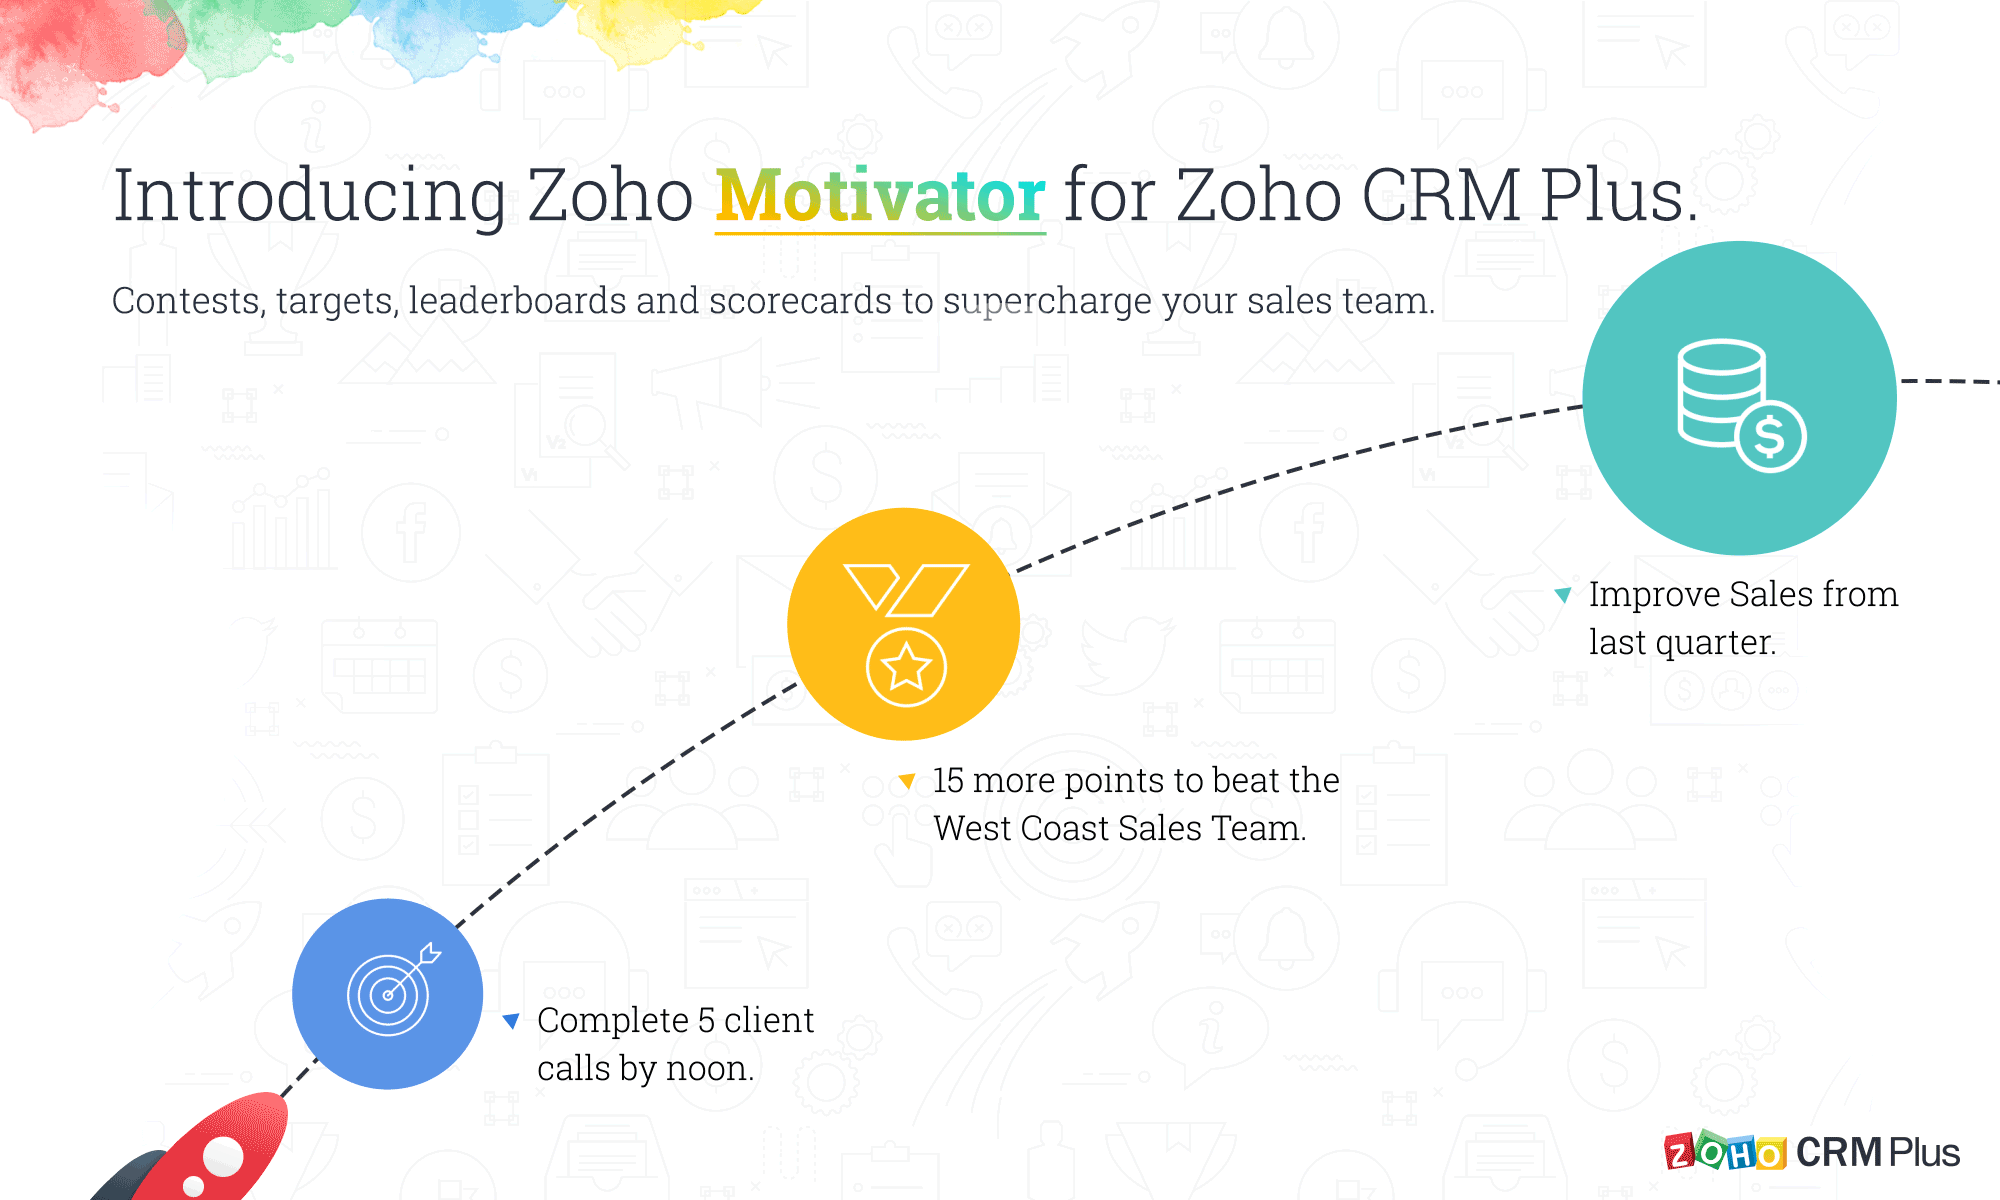 Announcing the newest member of the Zoho CRM Plus Customer Engagement Suite: Zoho Motivator.